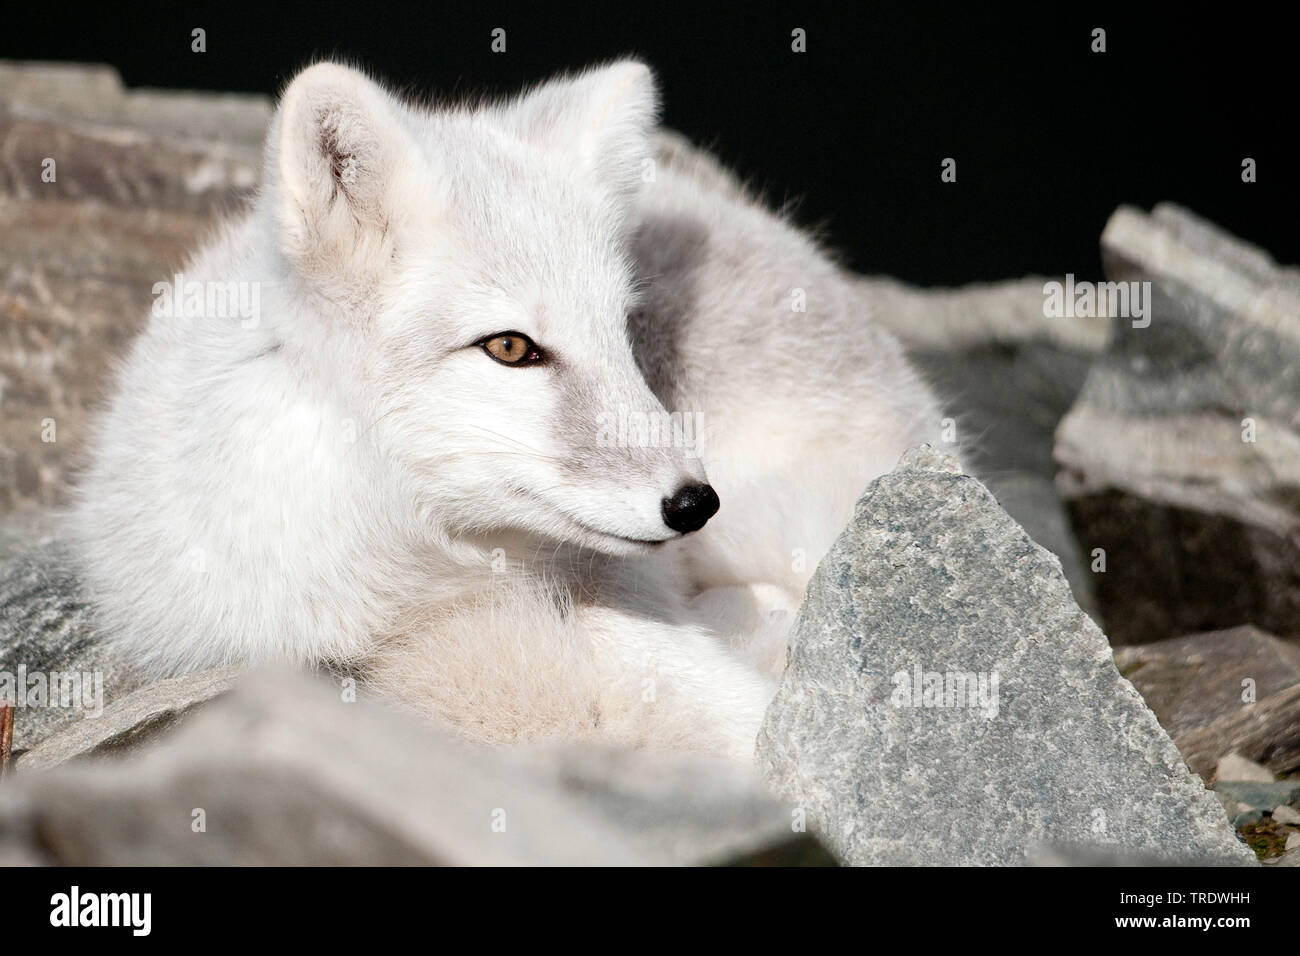 Winter Coat High Resolution Stock Photography and Images - Alamy